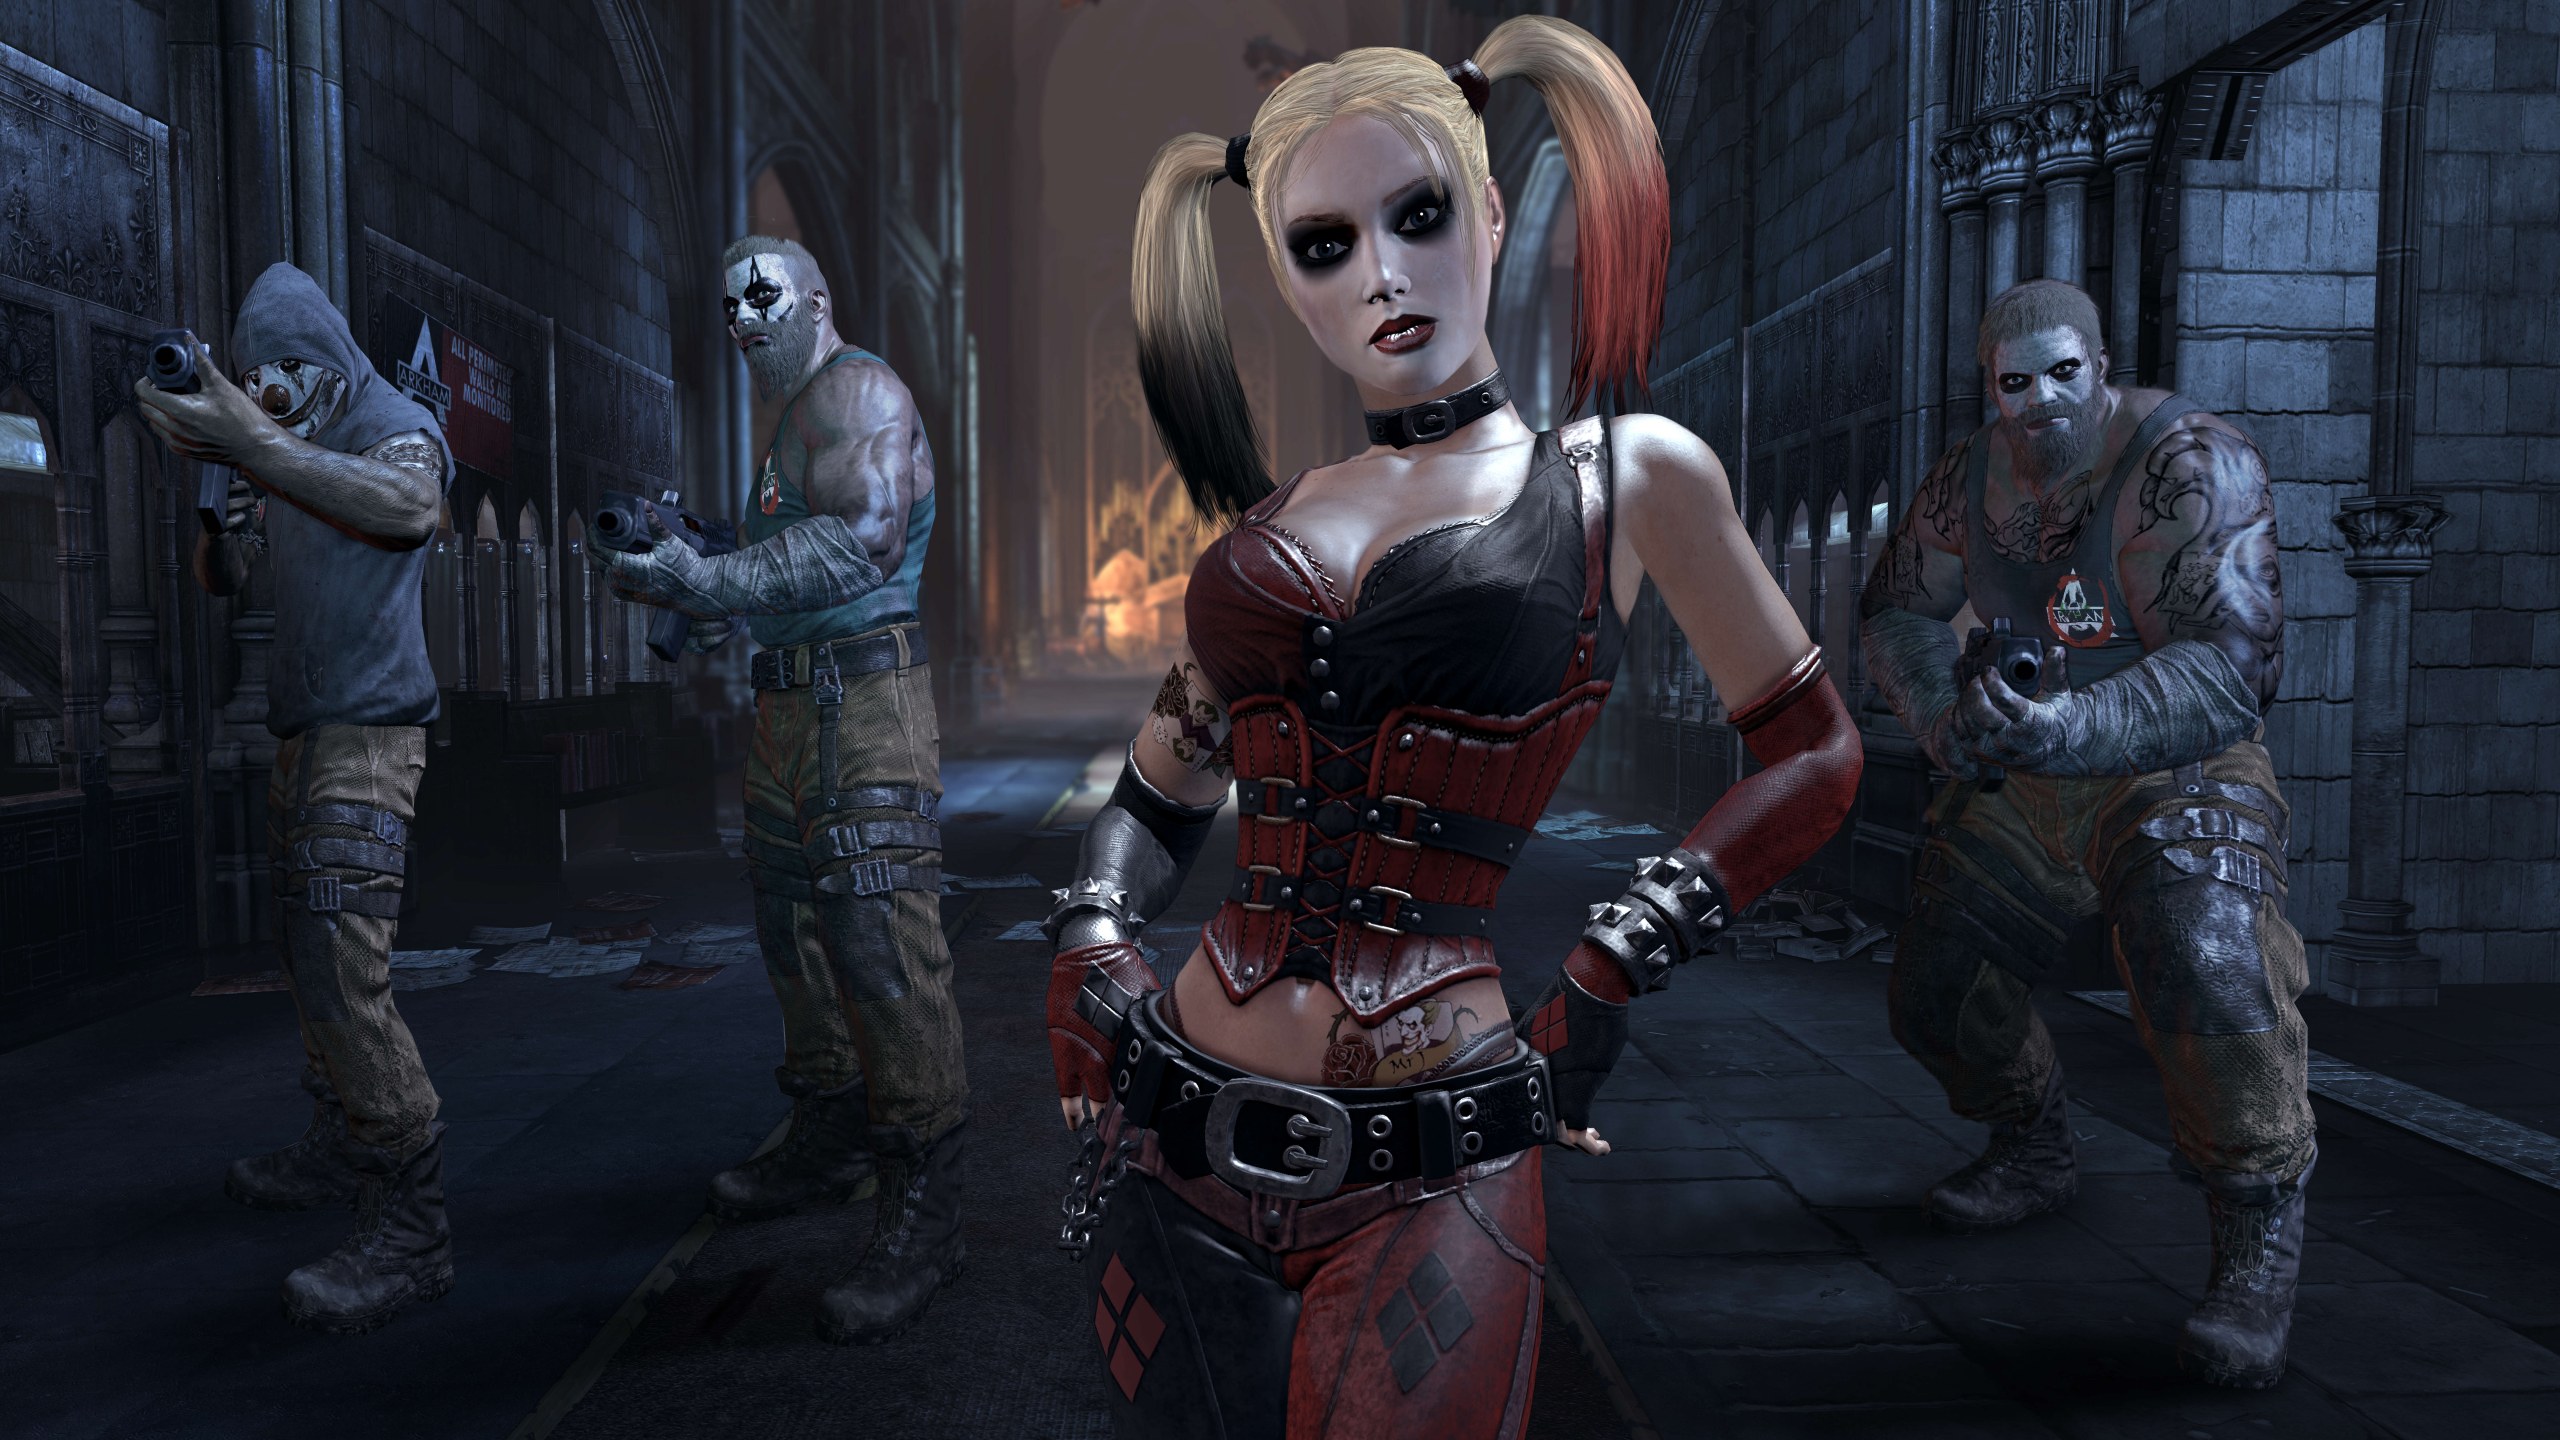 Rocksteady hints upcoming Suicide Squad game reveal at DC virtual event